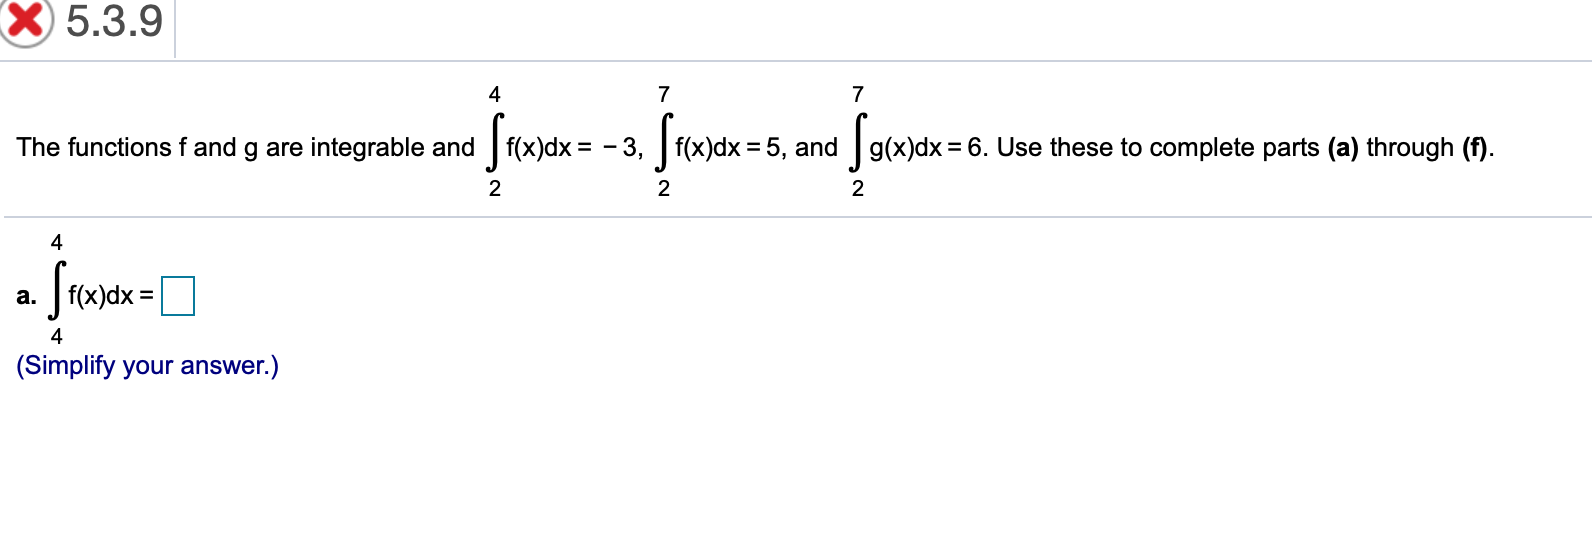 X5.3.9
4
7
7
The functions f and g are integrable and f(x)dx= -3,f(x)dx 5, and g(x)dx 6. Use these to complete parts (a) through (f)
2
2
2
4
.fxdx=[
4
(Simplify your answer.)
